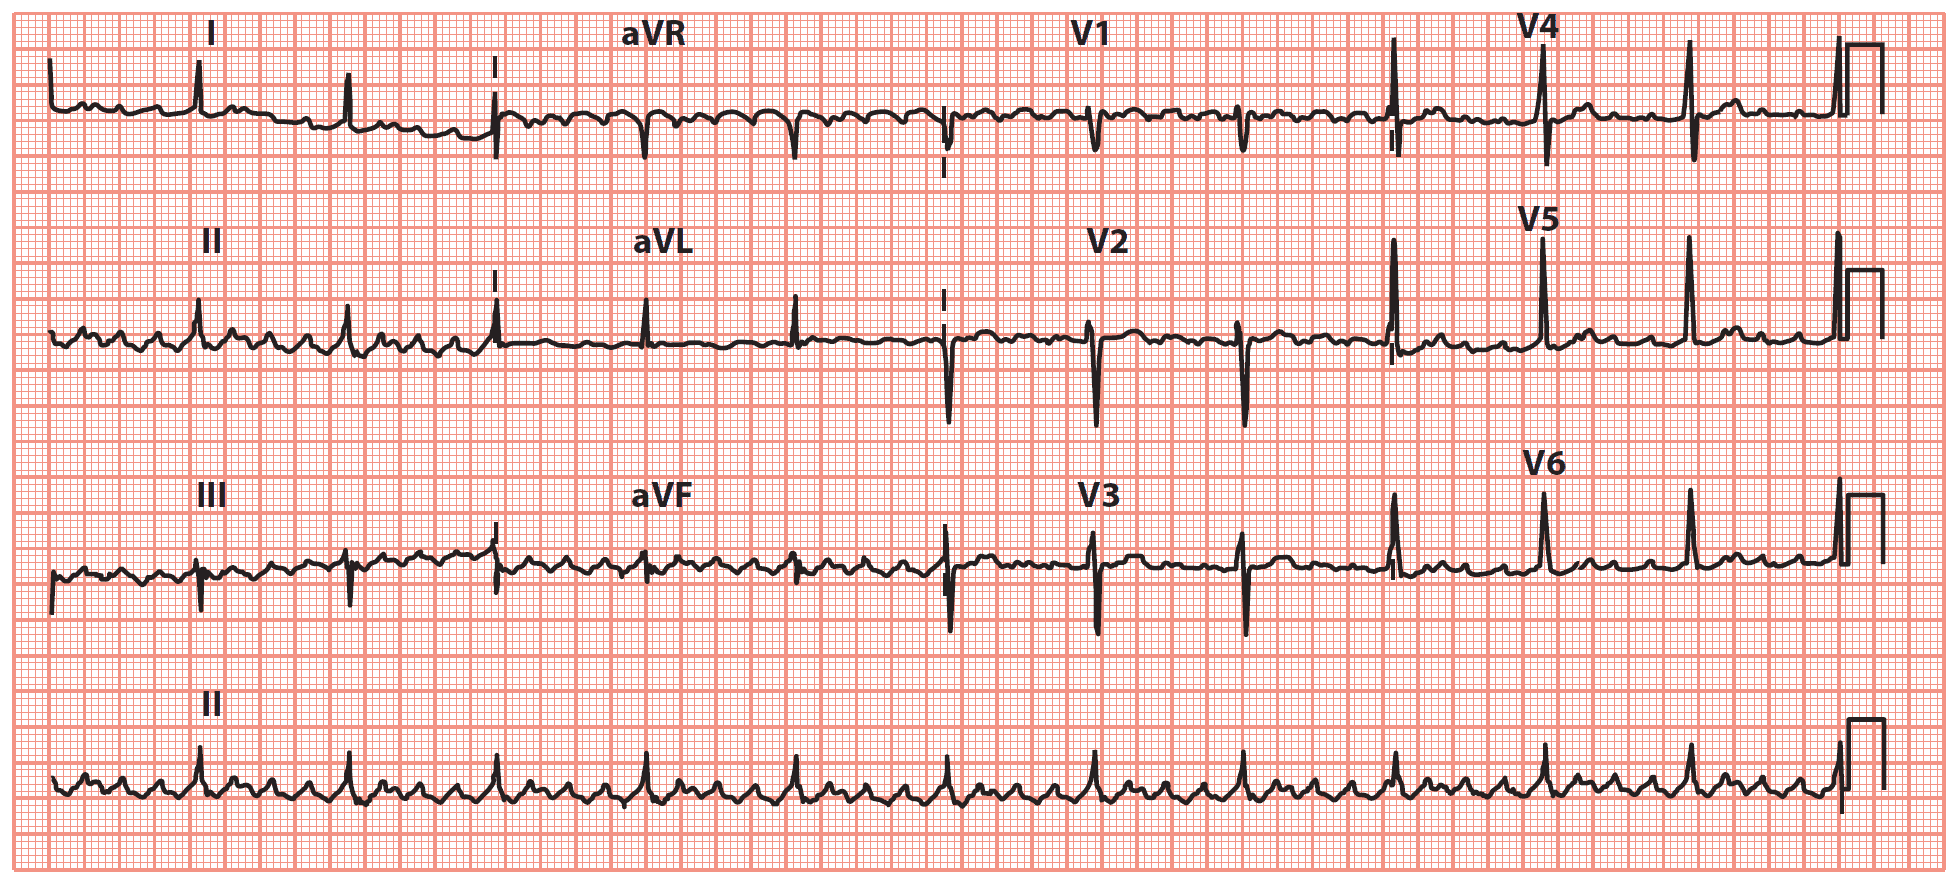 Atrial Flutter with ‘sawtooth’ pattern of atrial activity, with an atrial rate of 288/min and a ventricular rate of 72/min (indicating 4:1 AV block)